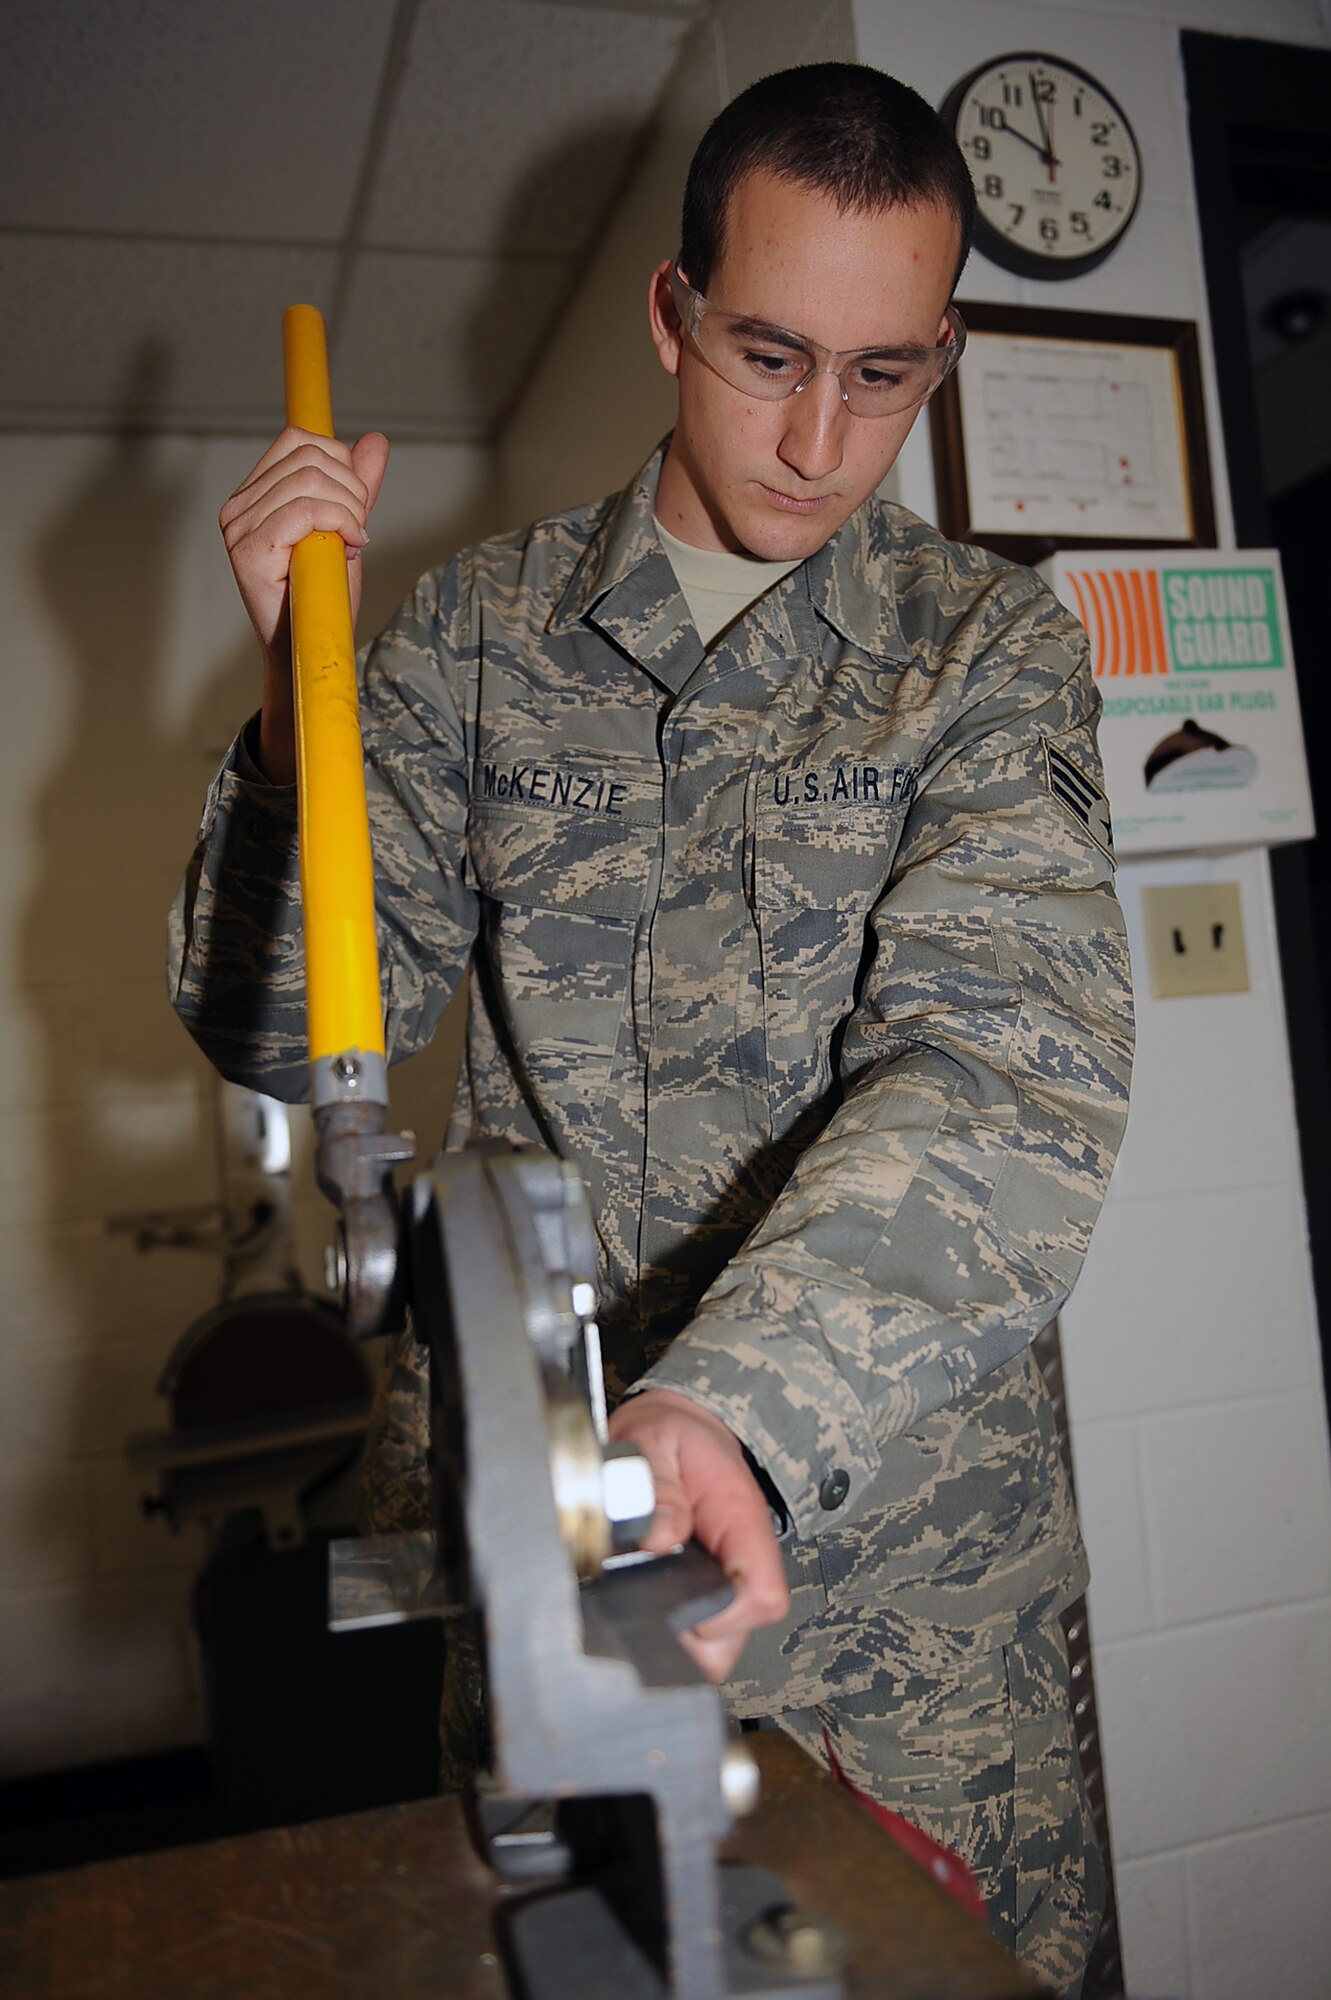 Senior Airman John McKenzie, 4th Equipment Maintenance Squadron aircraft structural maintenance journeyman, cuts metal patches for an aircraft replacement part at Seymour Johnson Air Force Base, N.C., Feb. 12, 2010. To cut the patches Airman McKenzie uses throat-less shears, a cutting tool that makes straight and complex cuts in sheet metal. McKenzie hails from Roseville, Calif. (U.S. Air Force photo/Senior Airman Ciara Wymbs) 